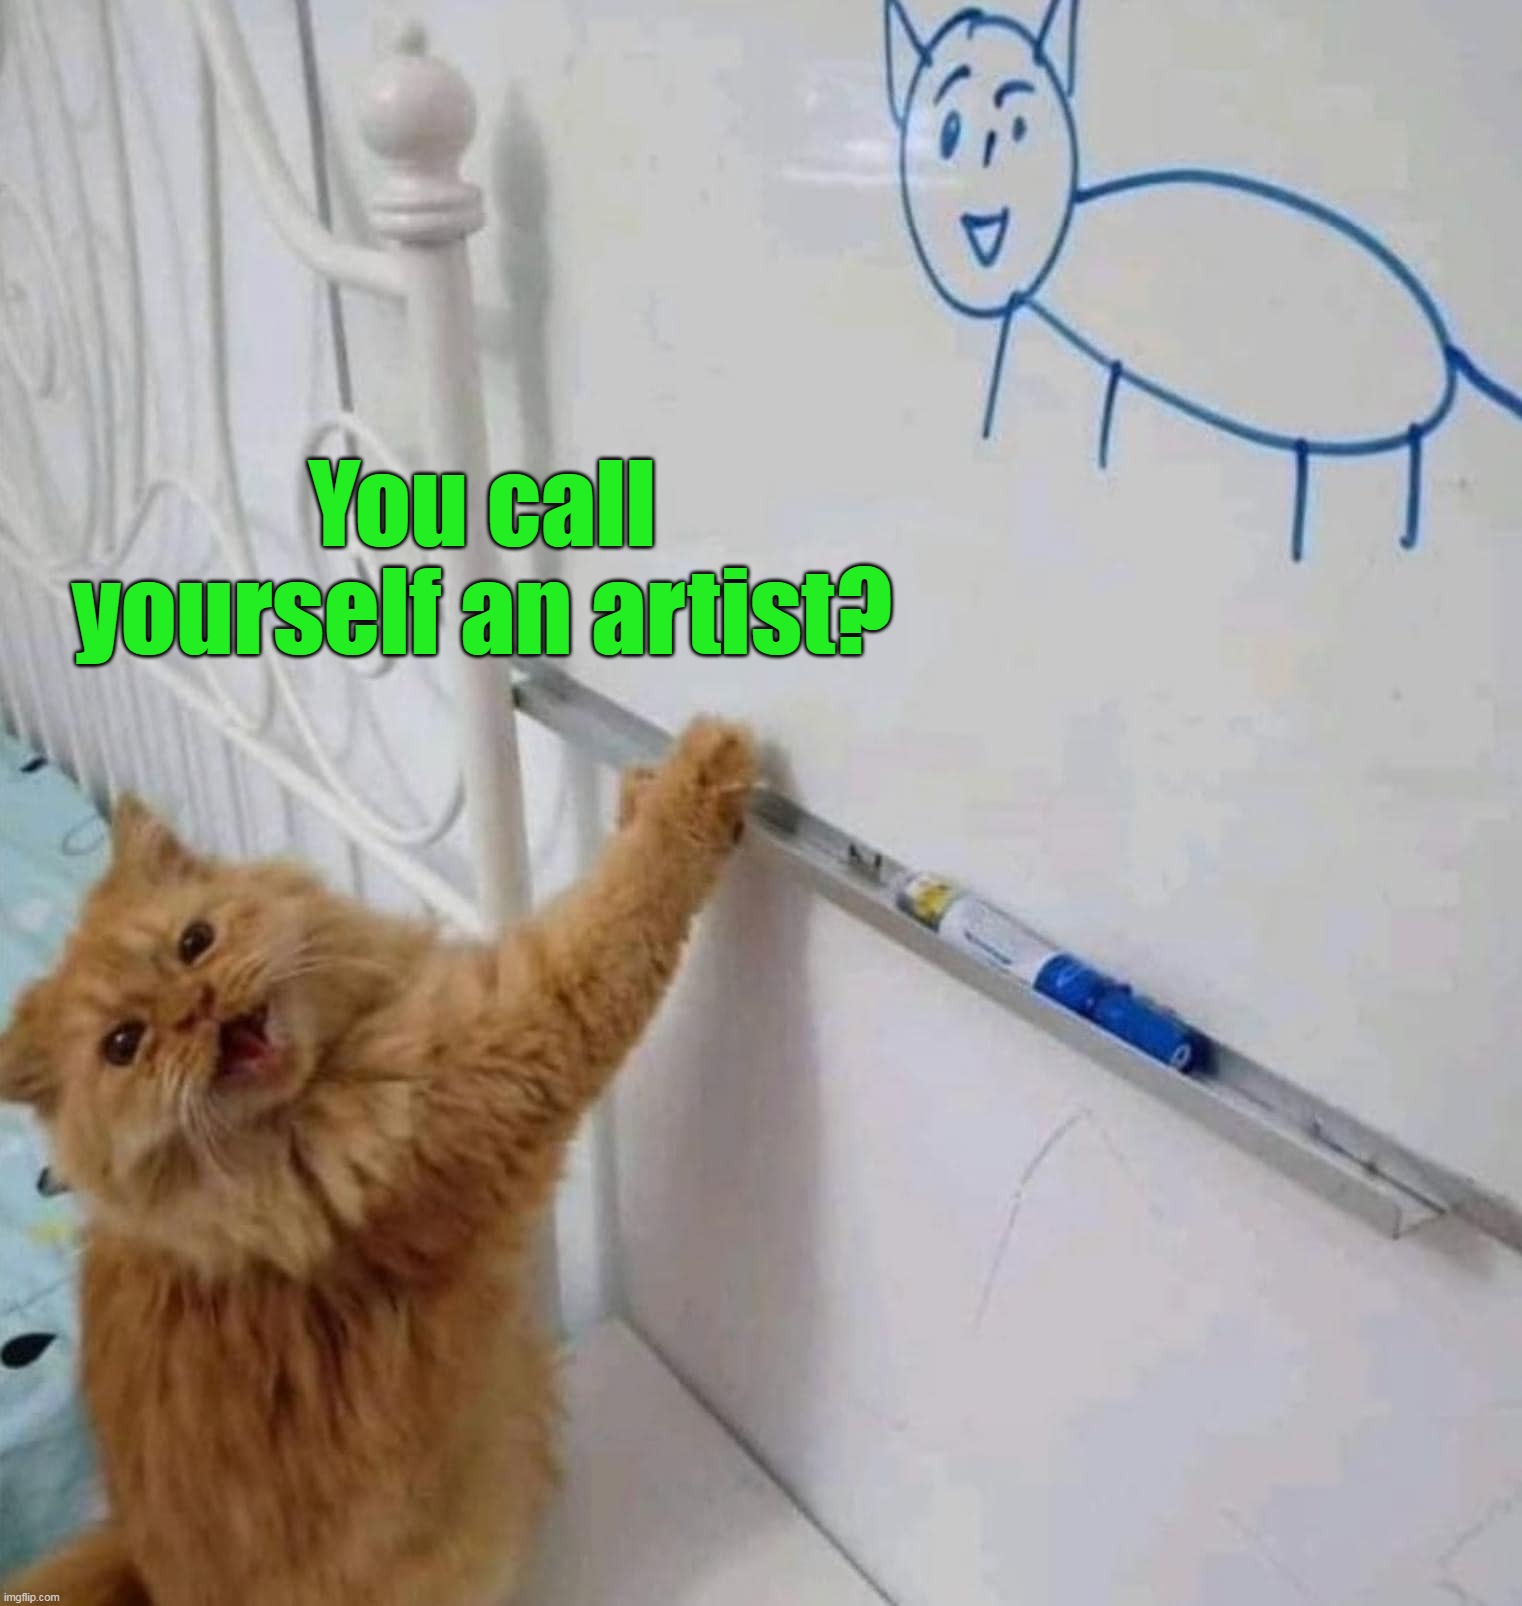  You call yourself an artist? | image tagged in meme,memes,humor,cat,cats | made w/ Imgflip meme maker